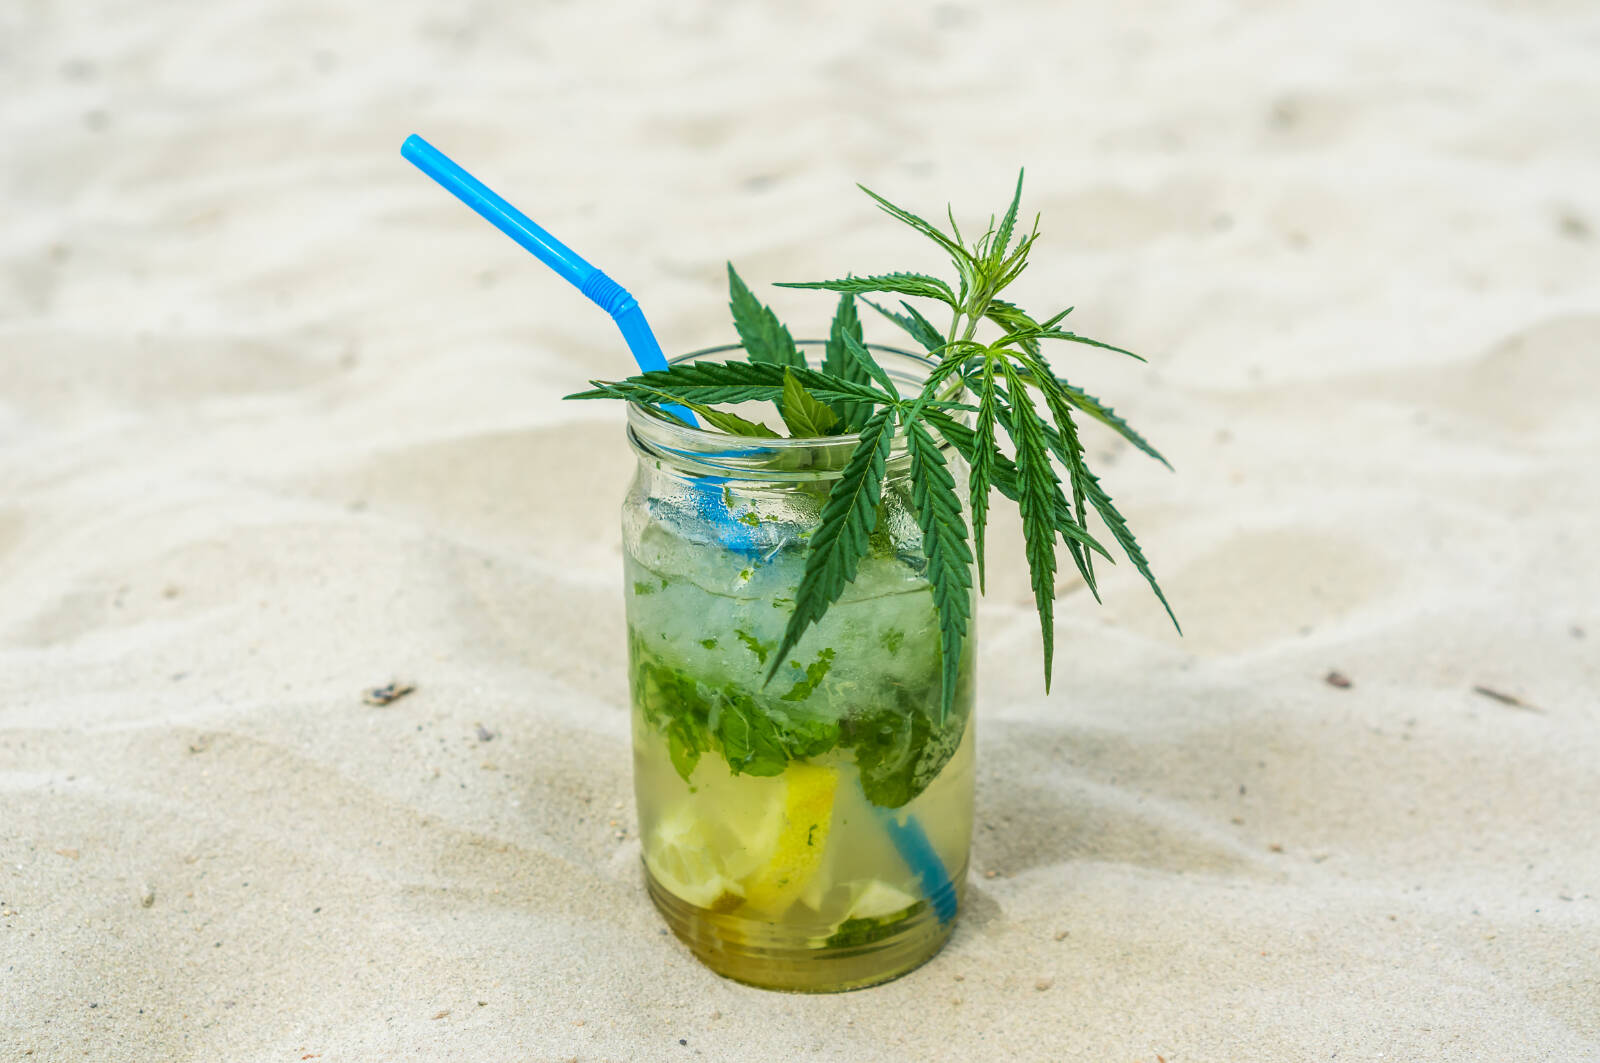 Celebrate high summer in California with these 5 taste-bud-tickling weed drinks